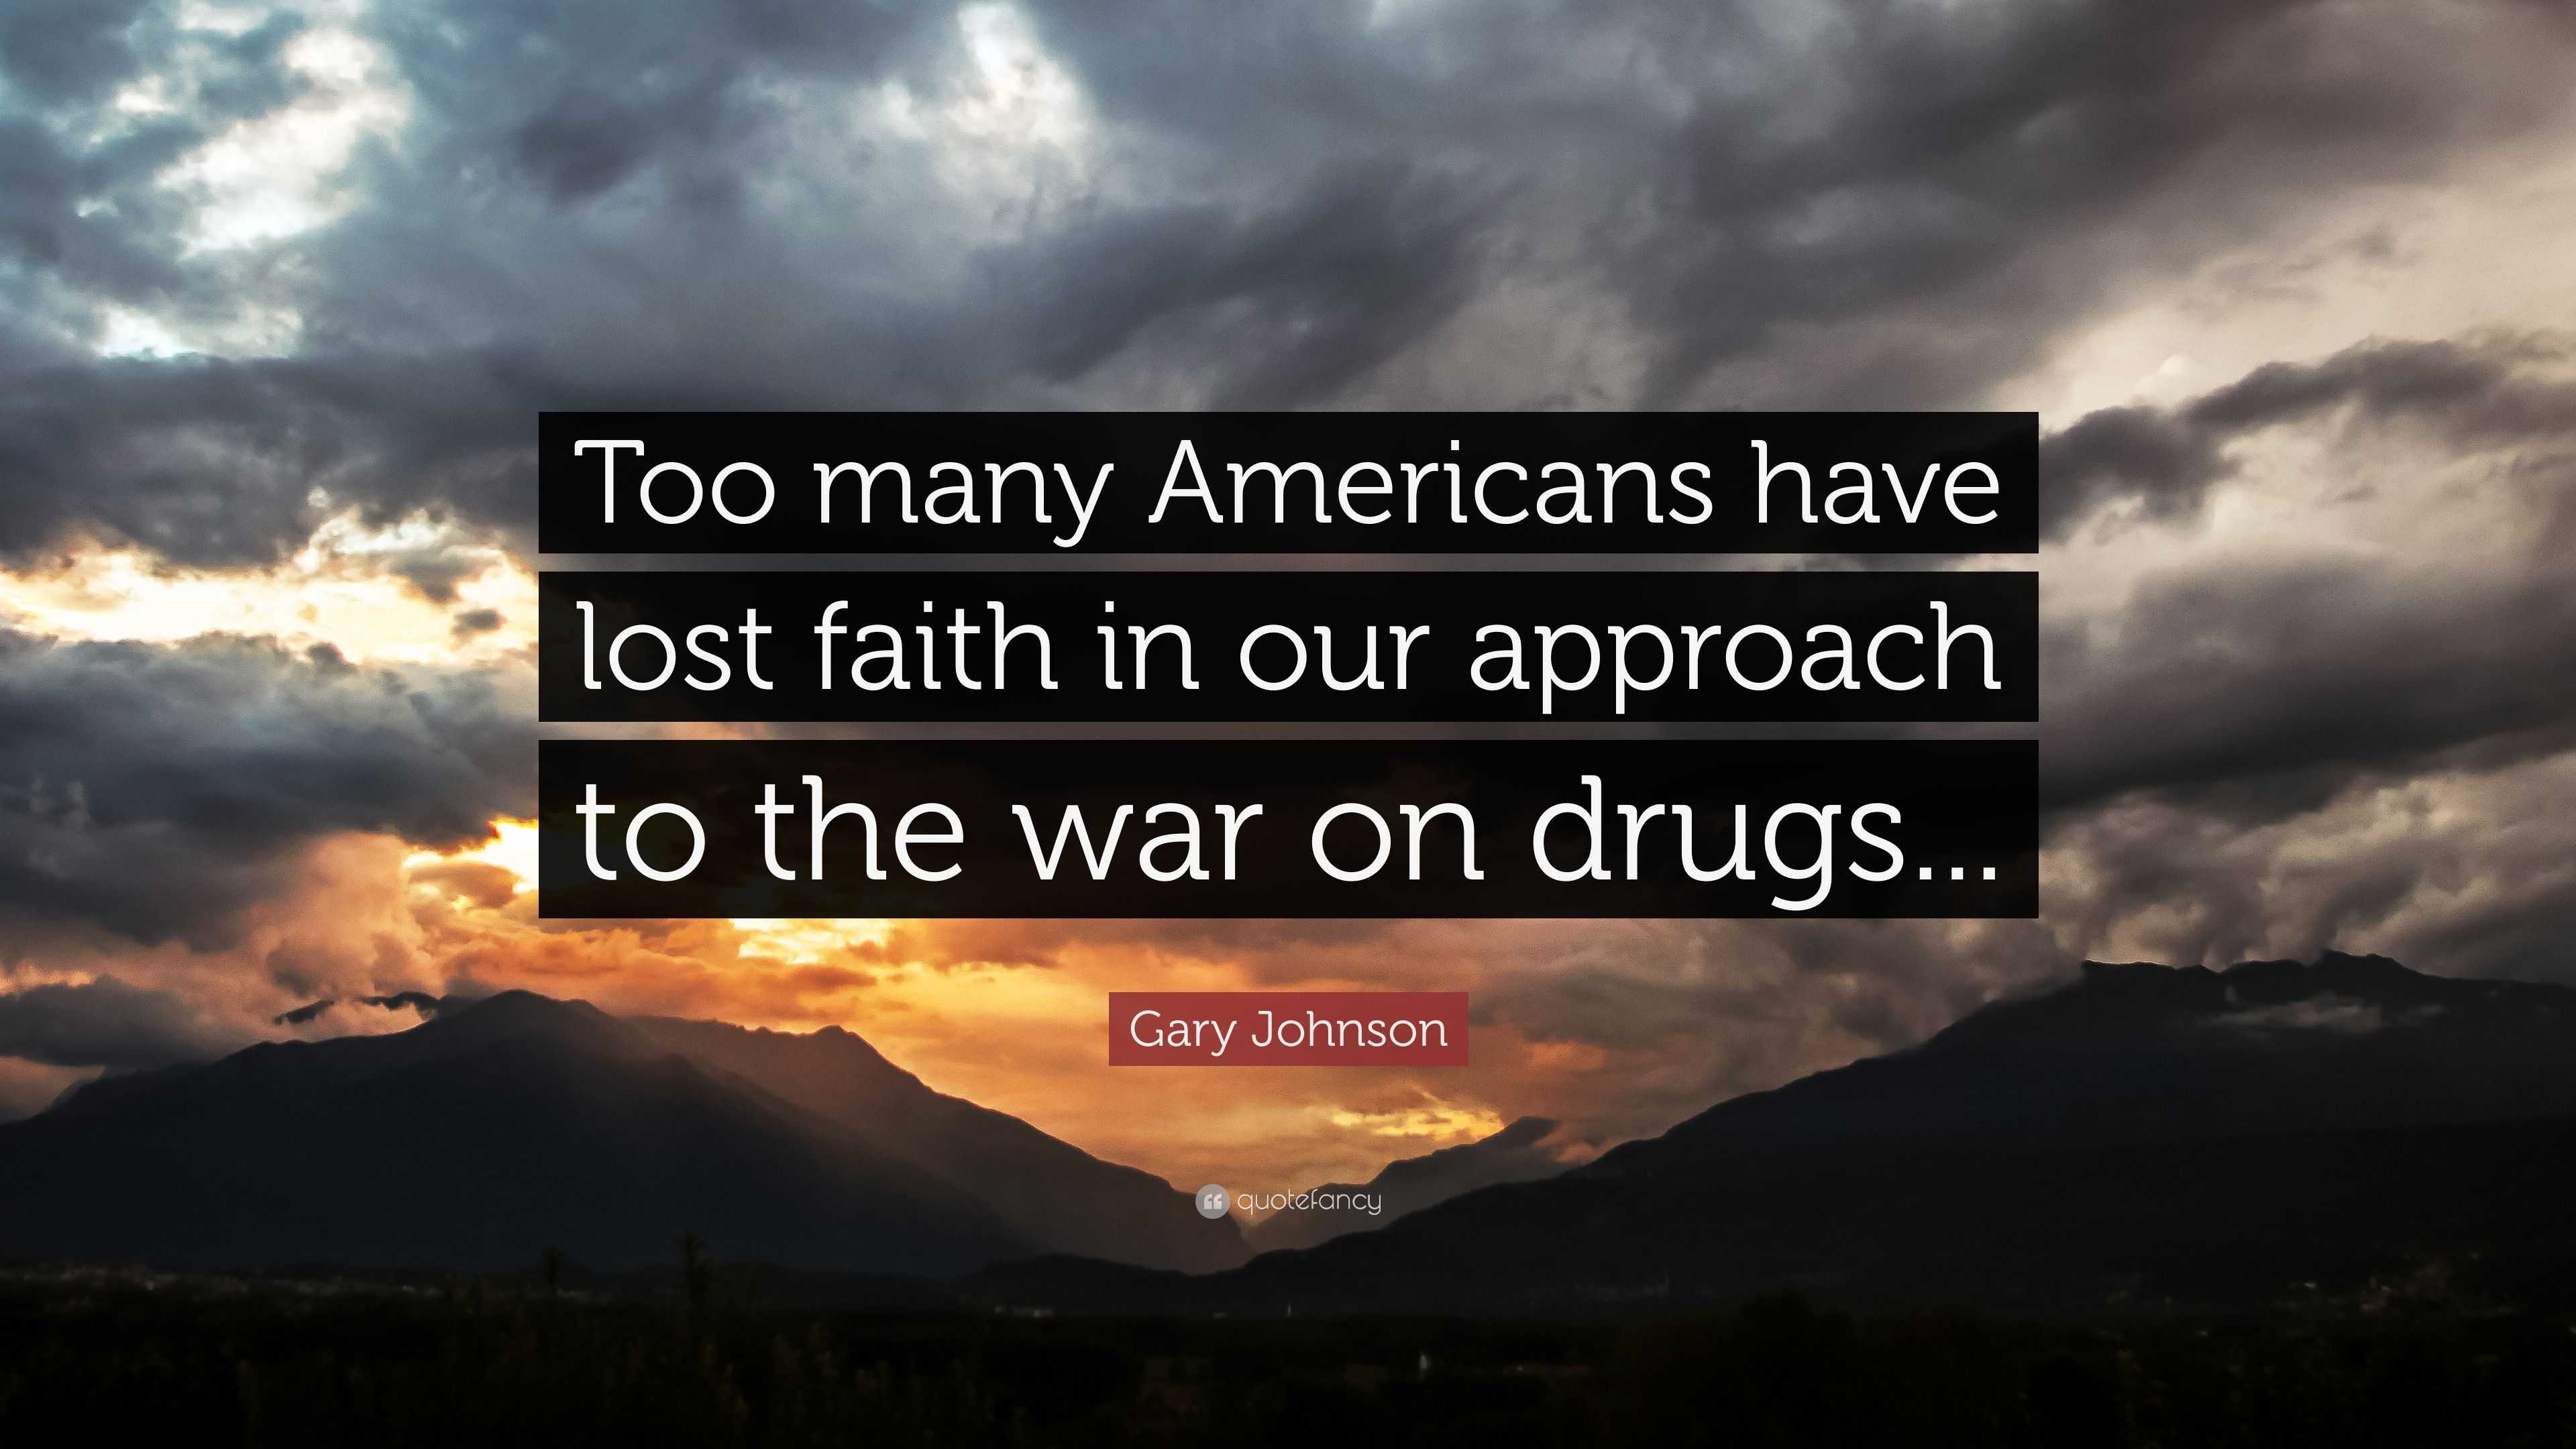 Quotes about the war on drugs